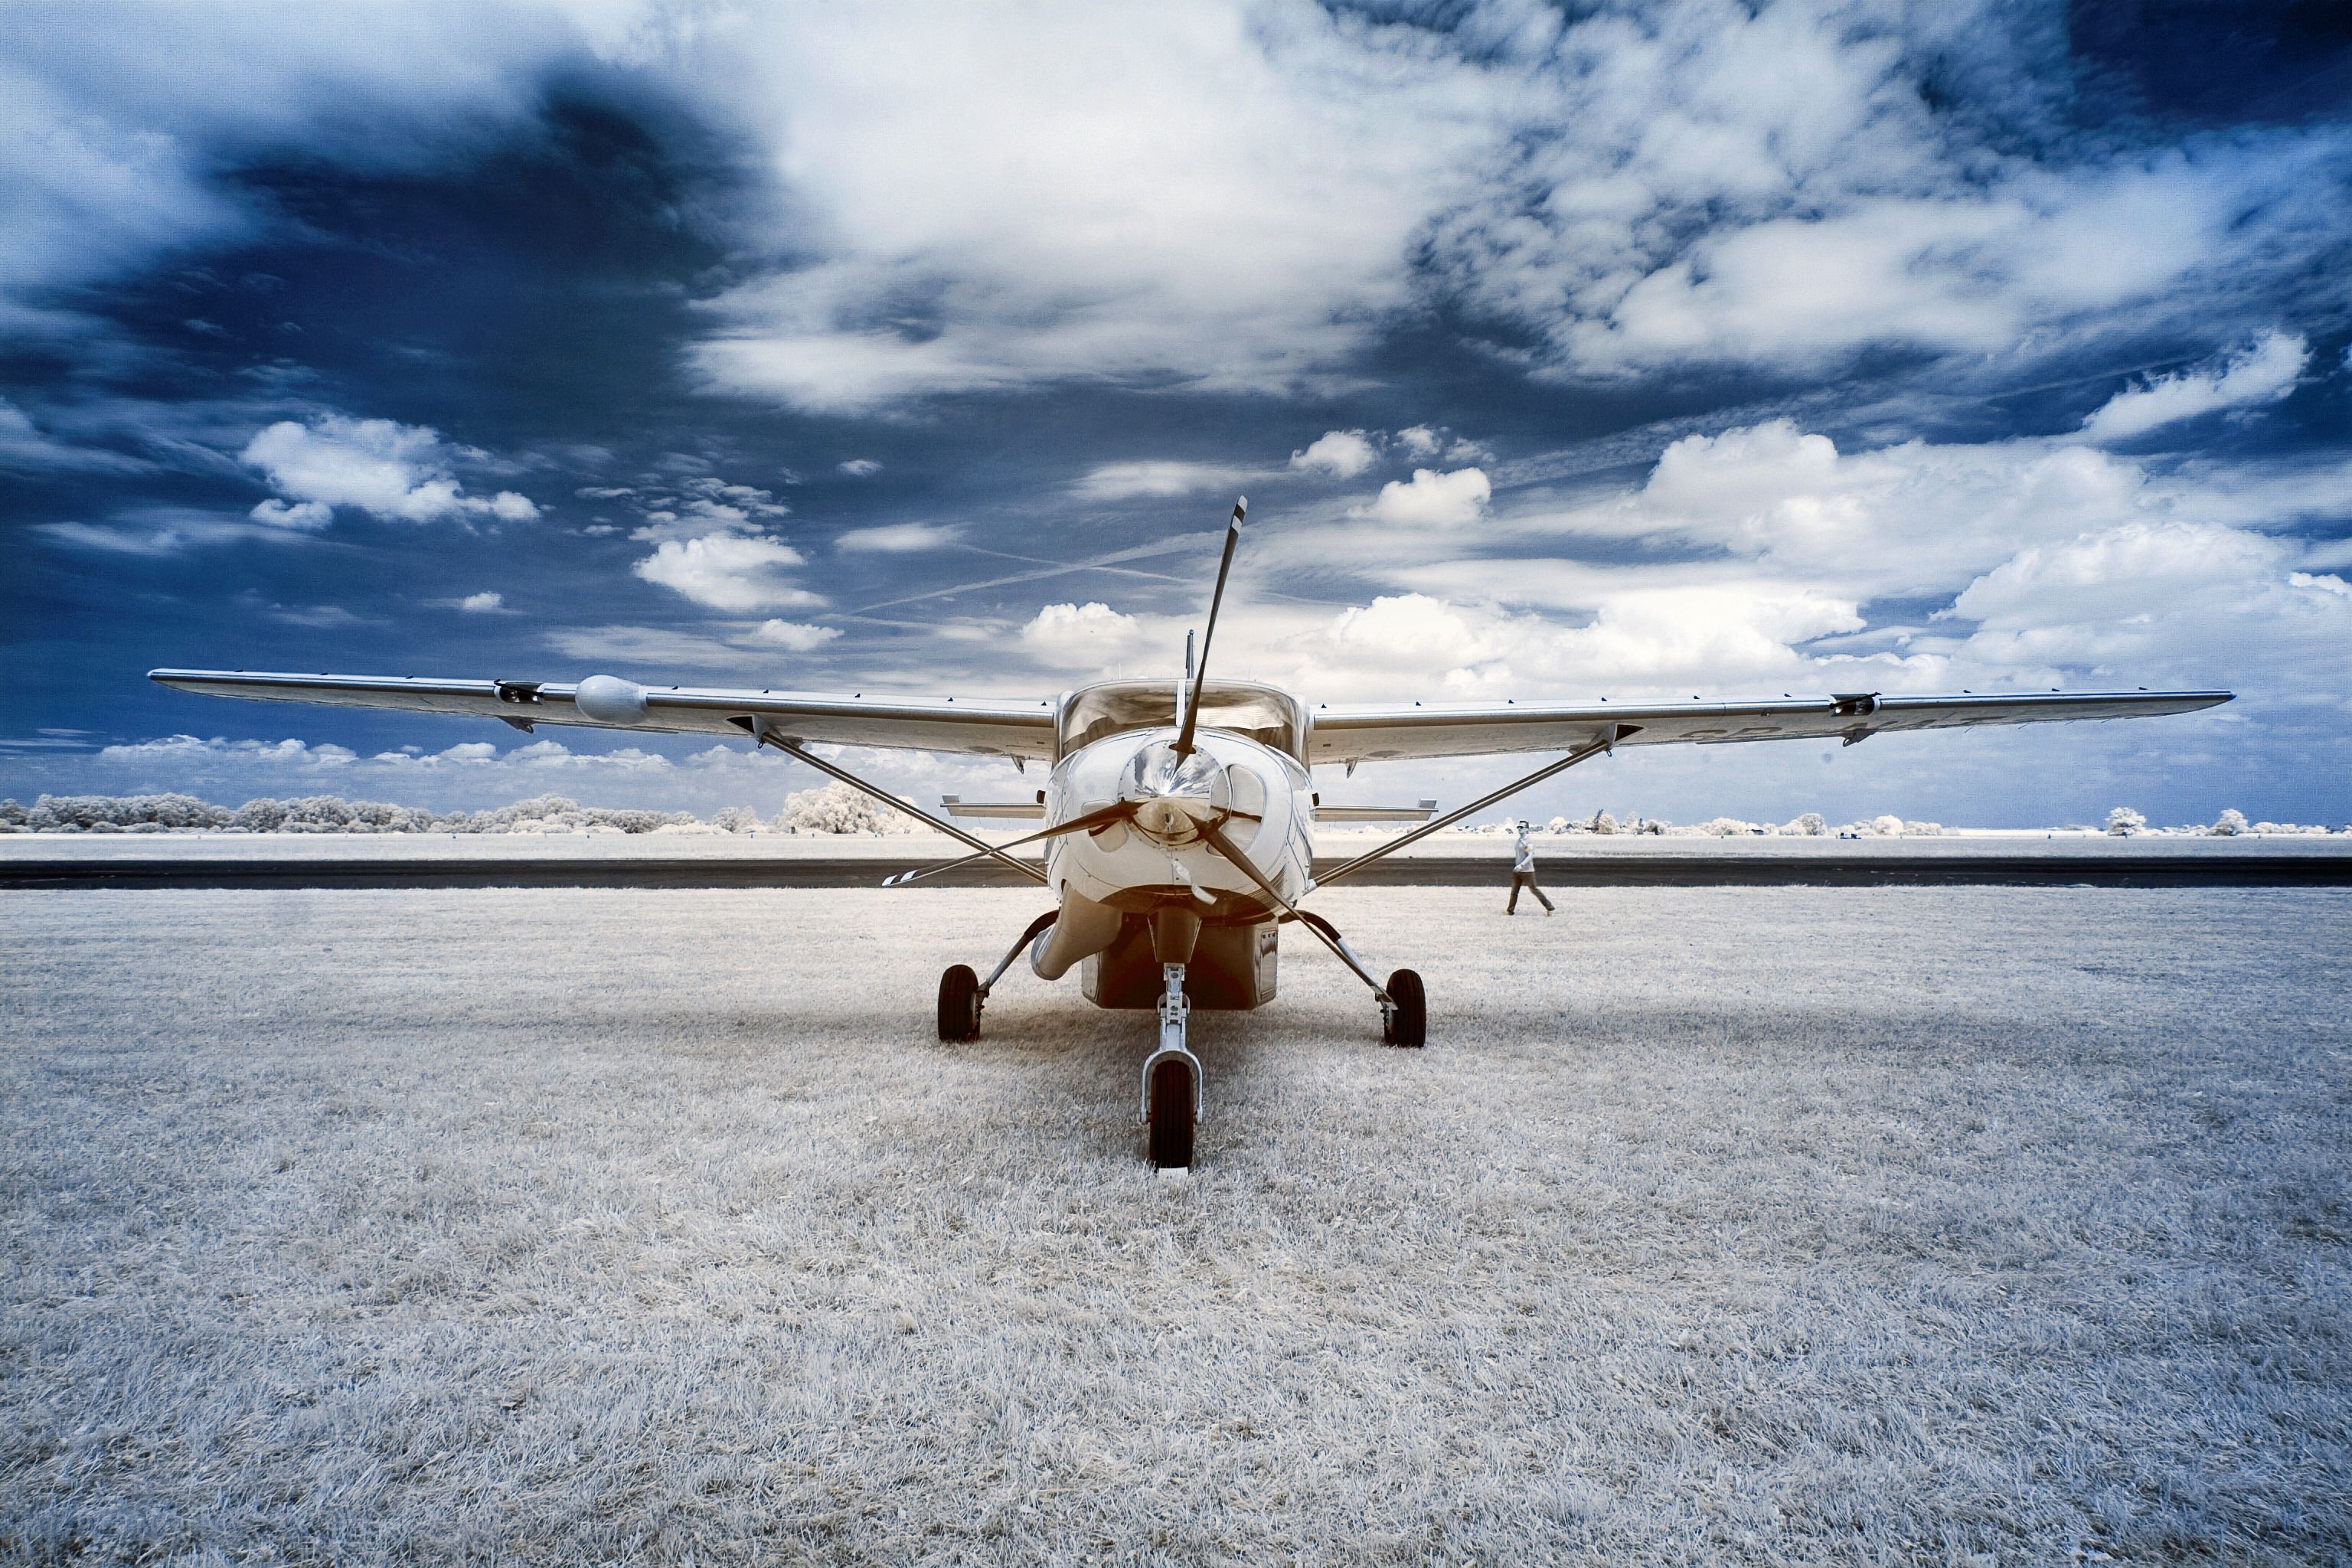 A general aviation aircraft parked on a snowy field.